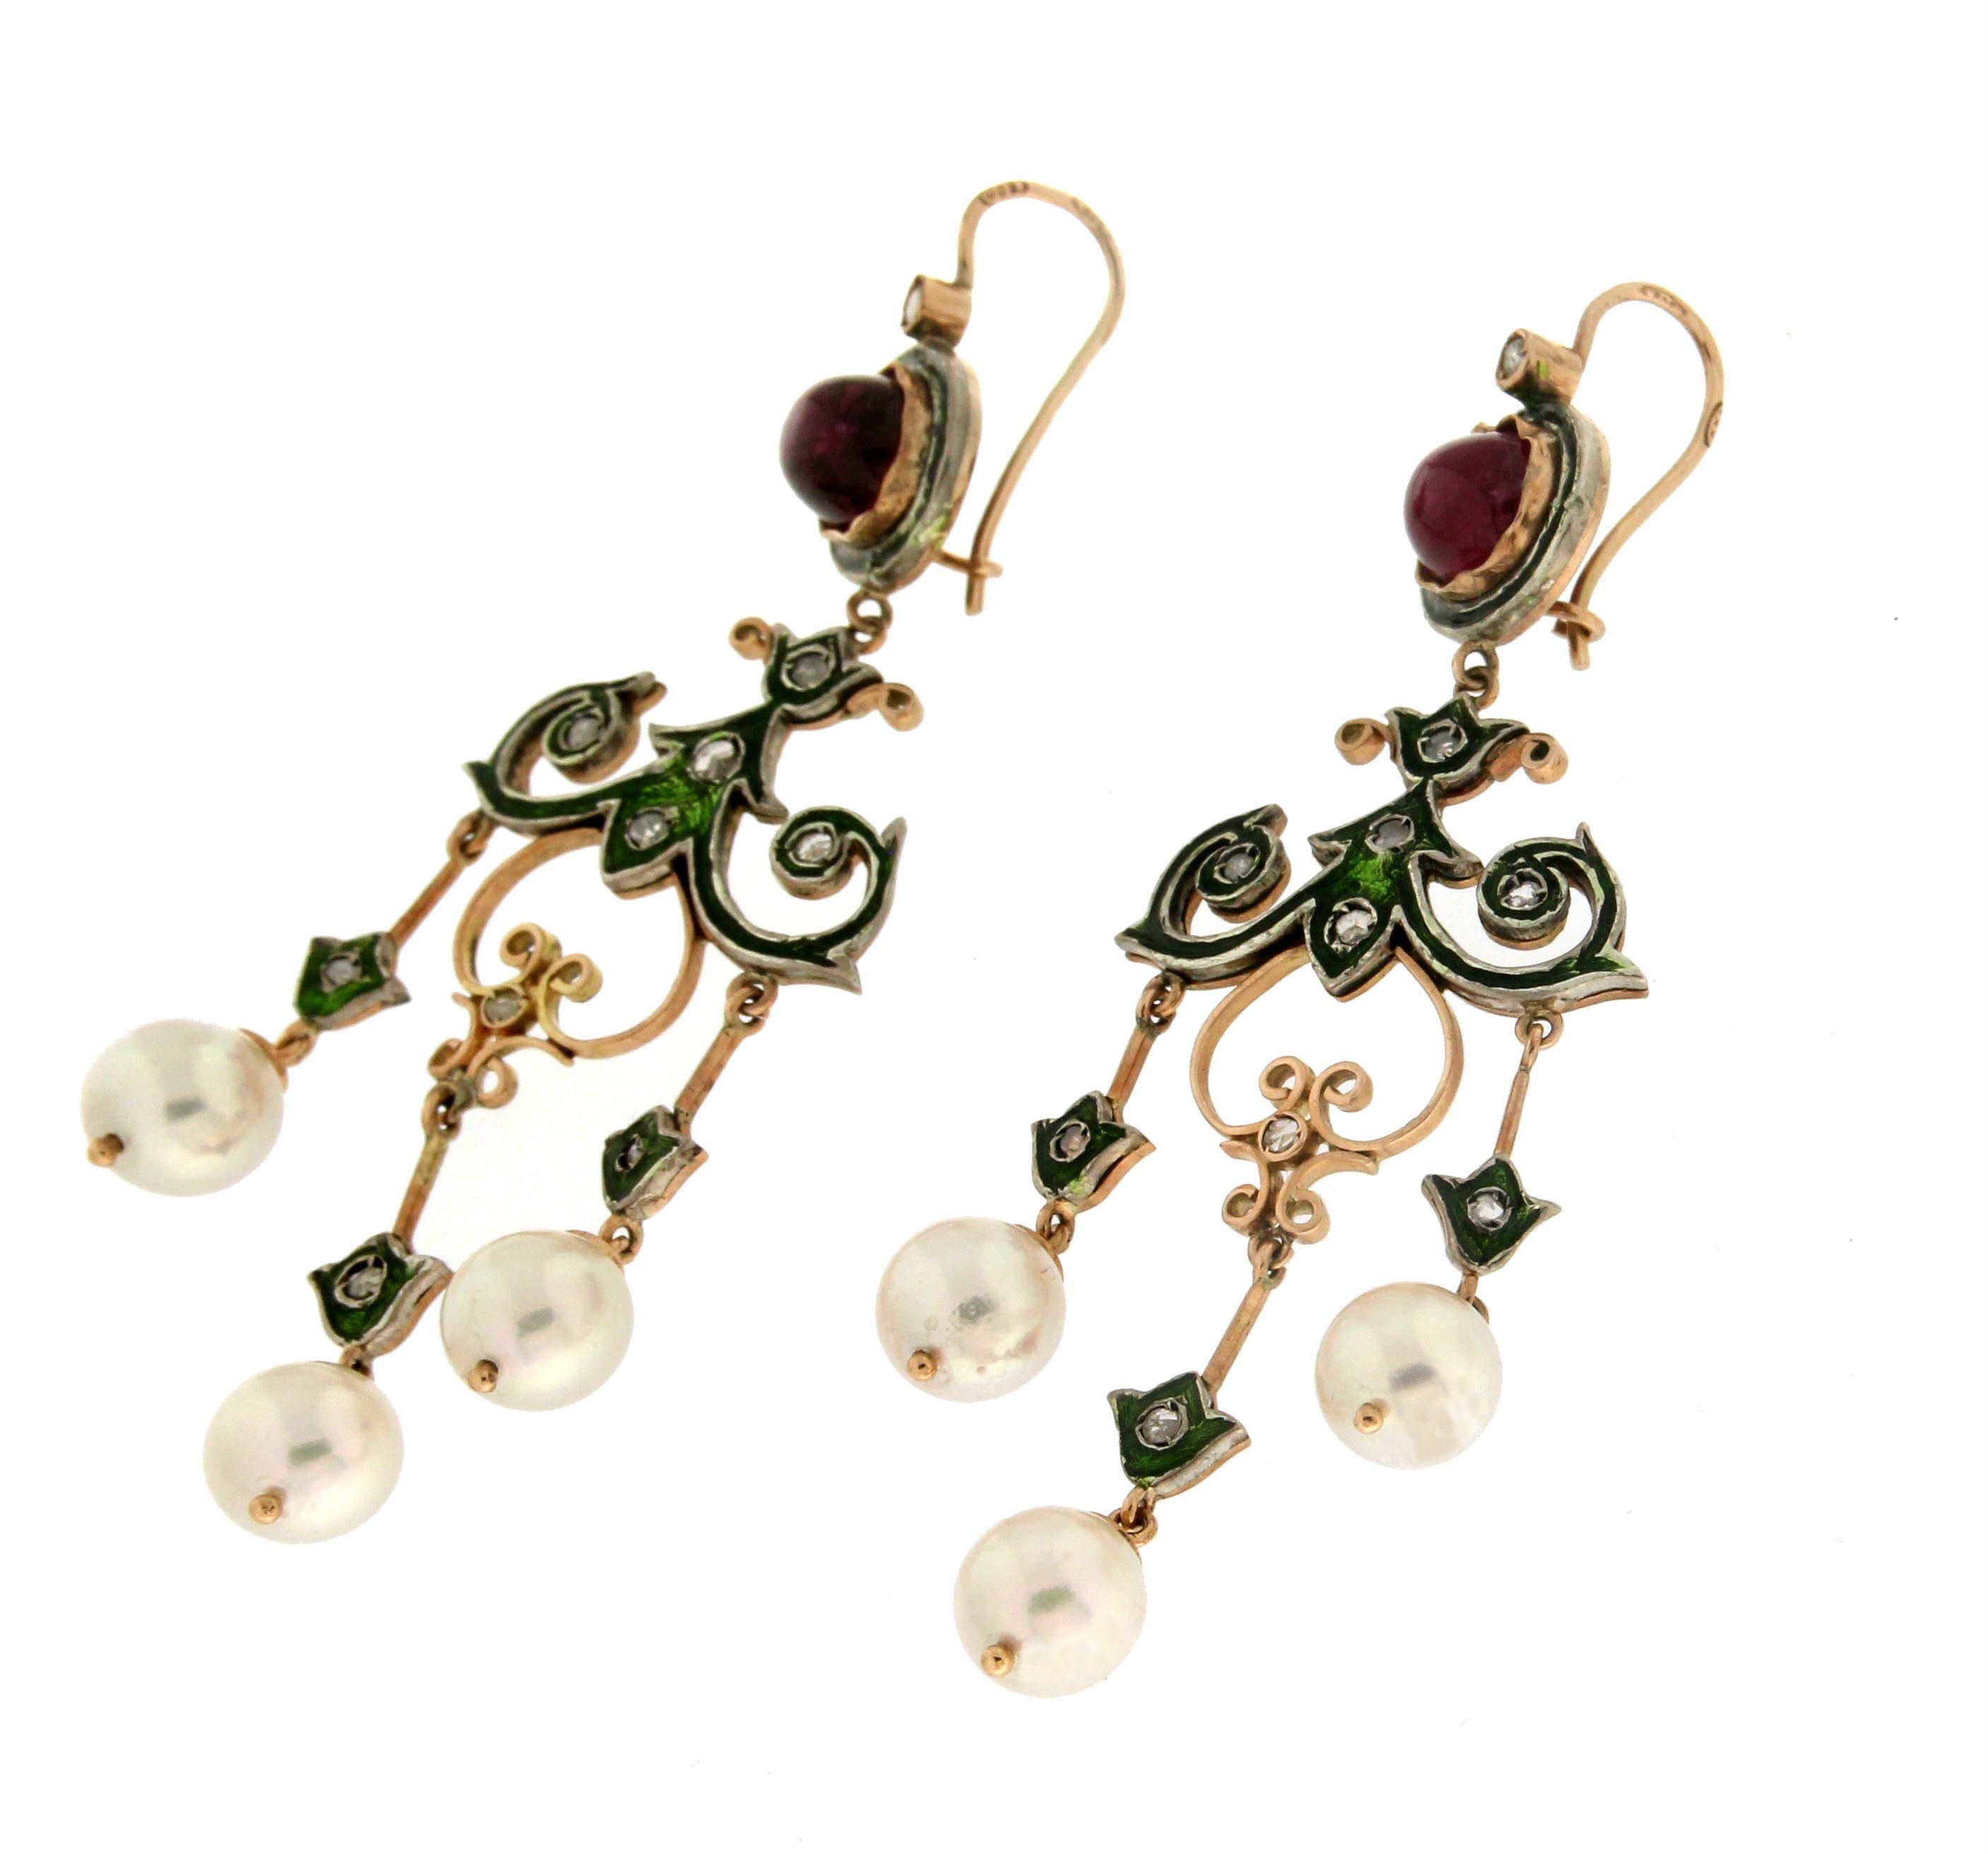 14 karat yellow gold drop earrings. Handmade by artisans and assembled with tourmaline,pearls and diamonds.

Tourmaline weight 5.88 karat
Diamonds weight 0.35 karat
Pearls size 8 mm
Earrings total weight 17.70 grams